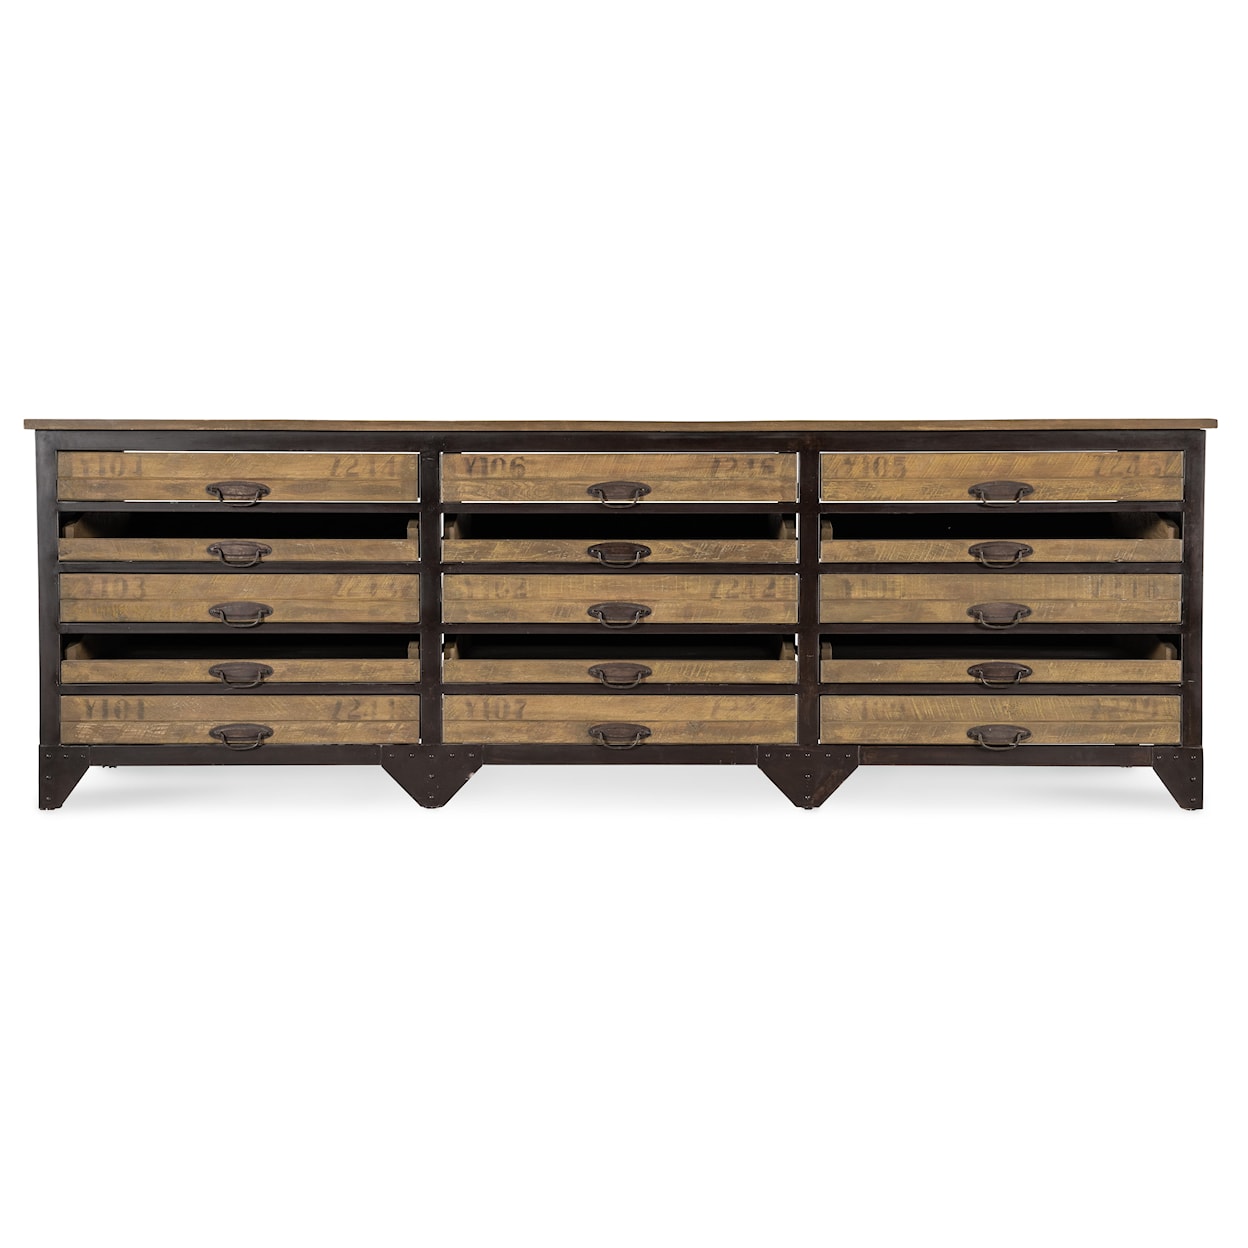 BOBO Intriguing Objects BOBO Intriguing Objects Industrial 15 Drawer Cabinet Counter